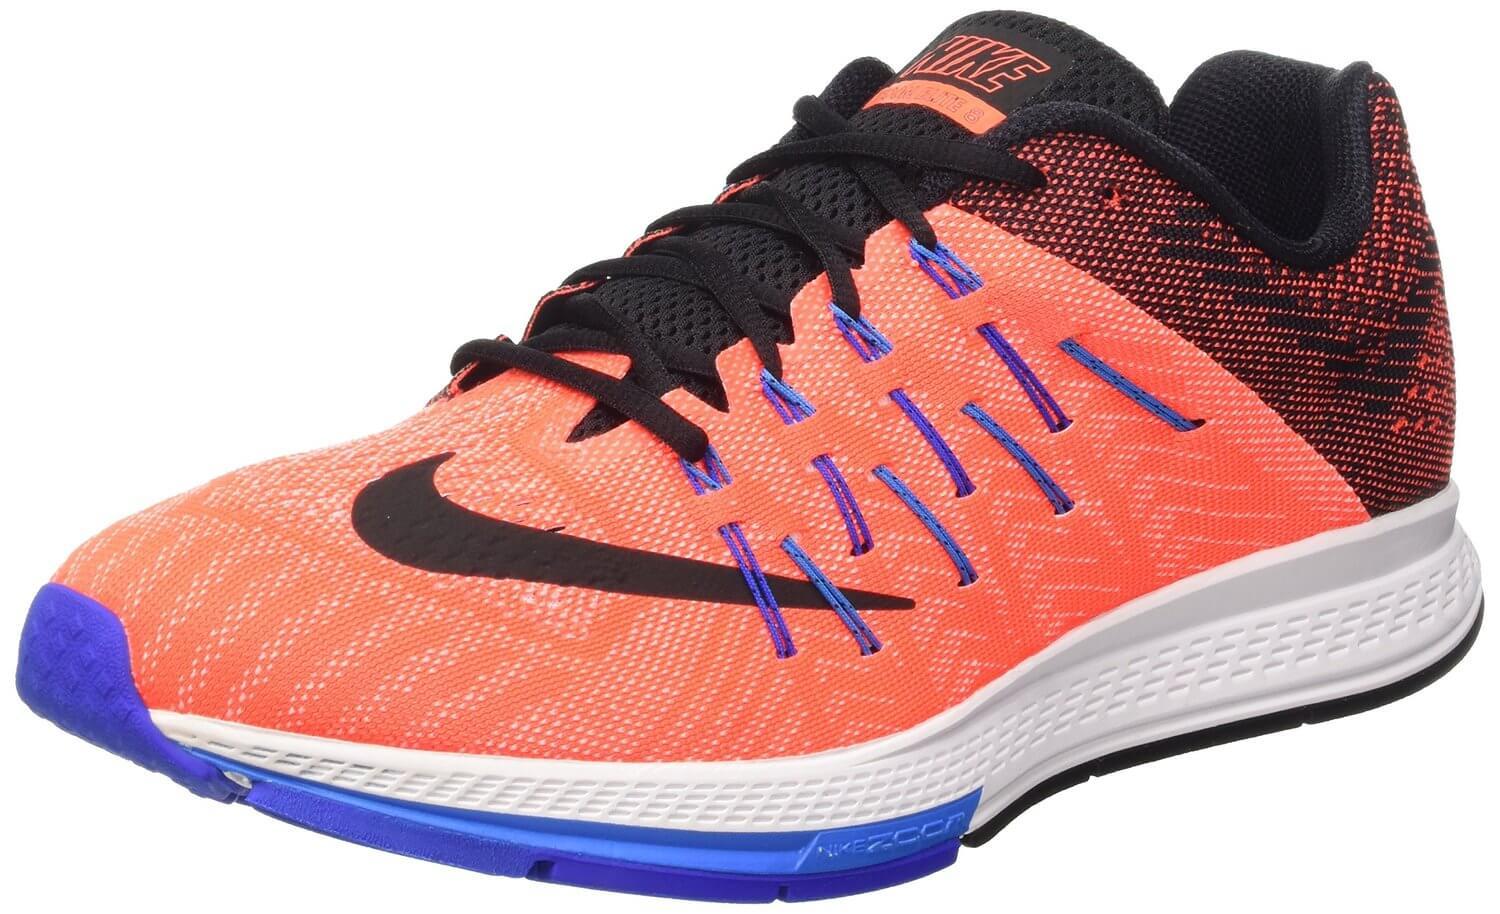 The Nike Air Zoom Elite 8 is one of the best performance training shoes on the market.